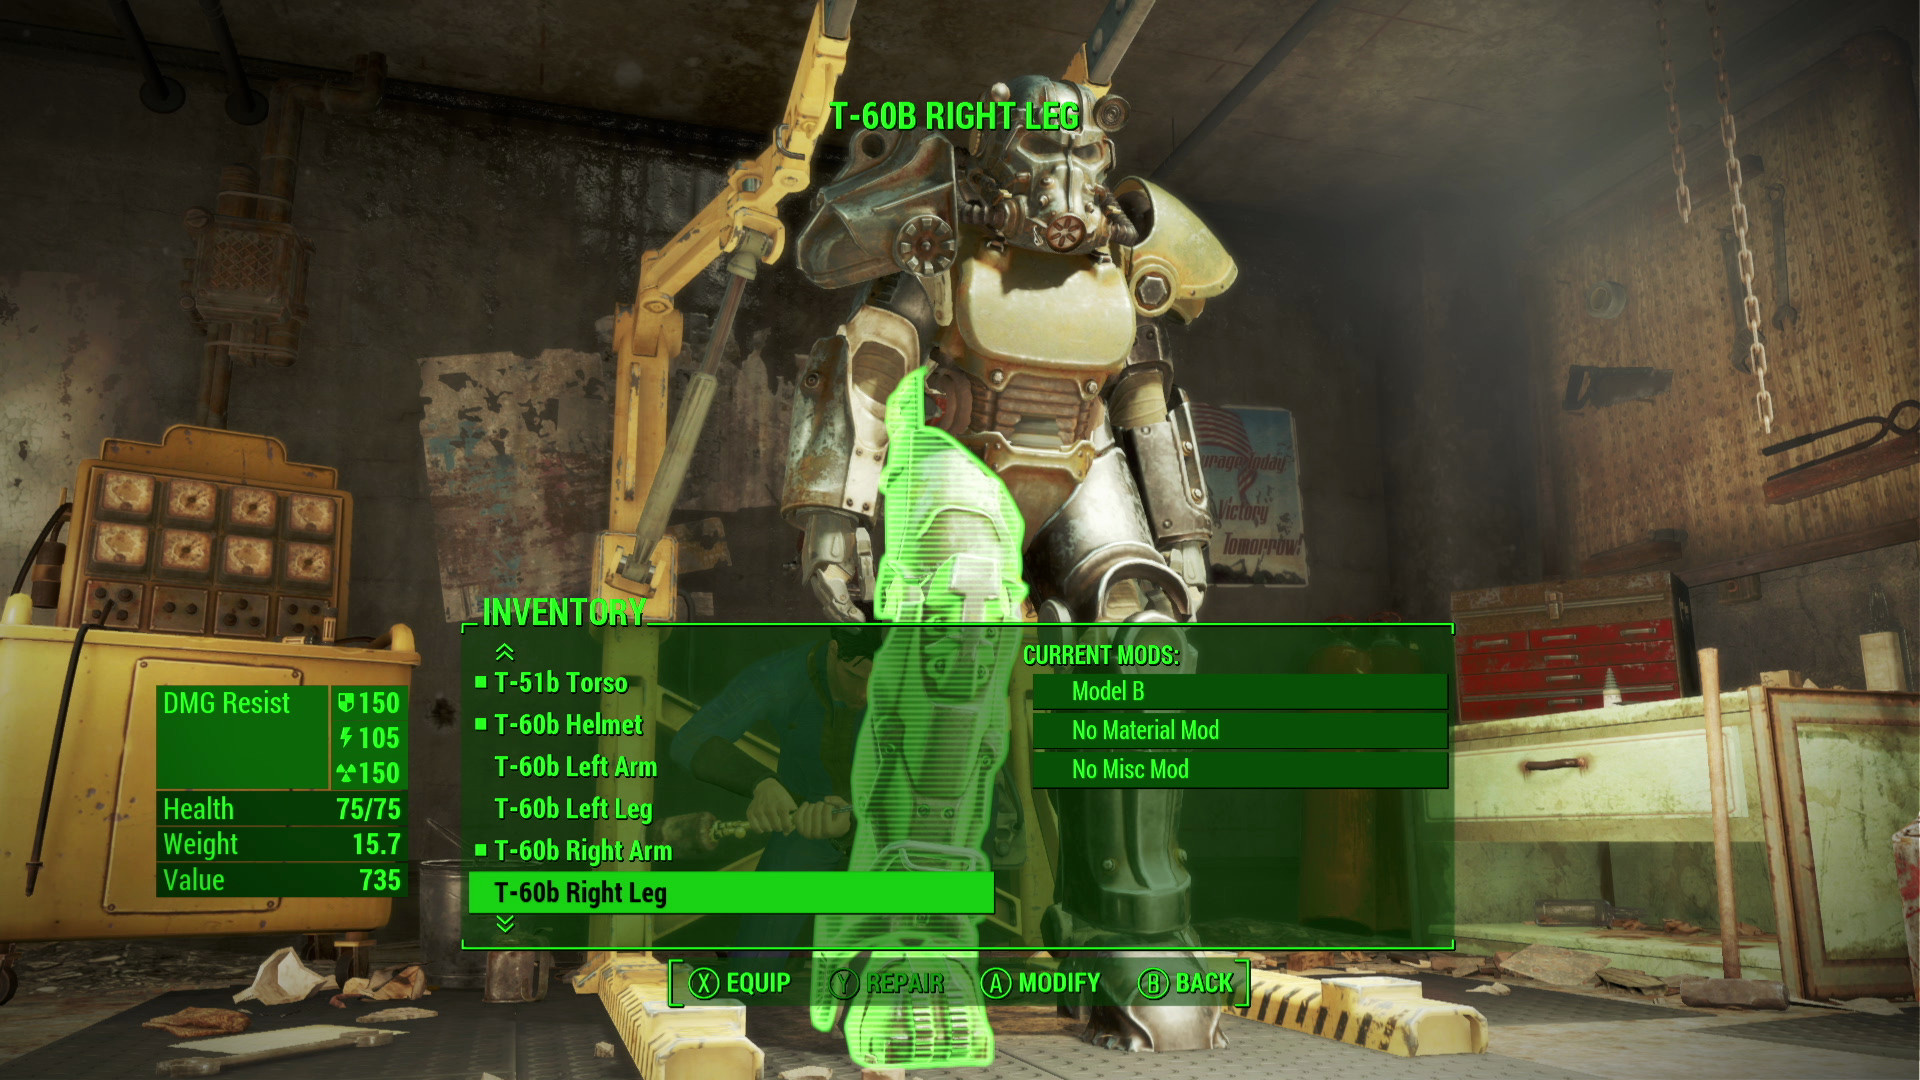 All Fallout 4 console commands and cheats